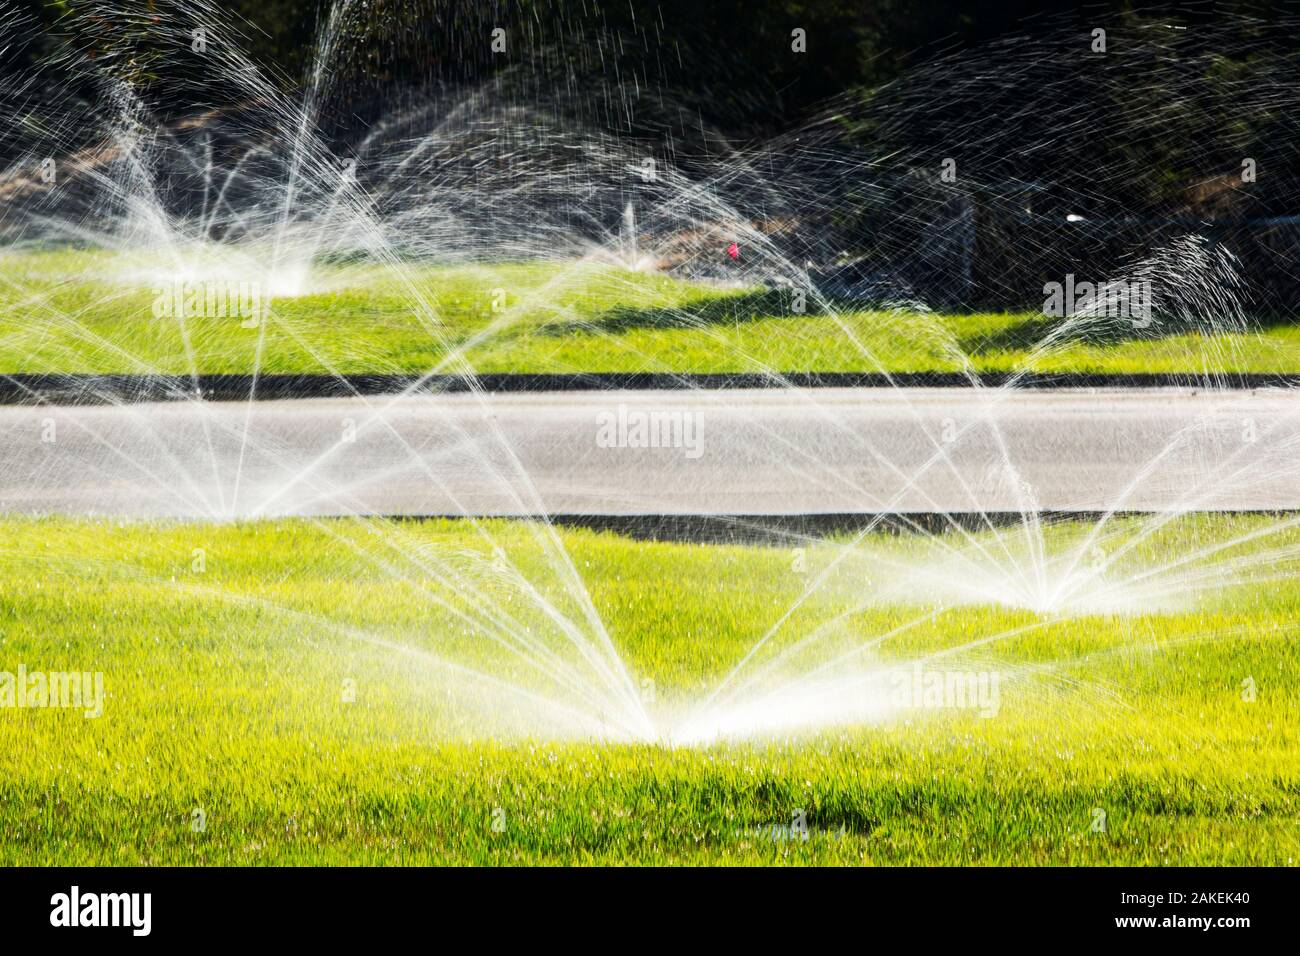 Sprinklers watering lawns during the worst drought in living memory, Fresno, California, USA. October 2014. Stock Photo